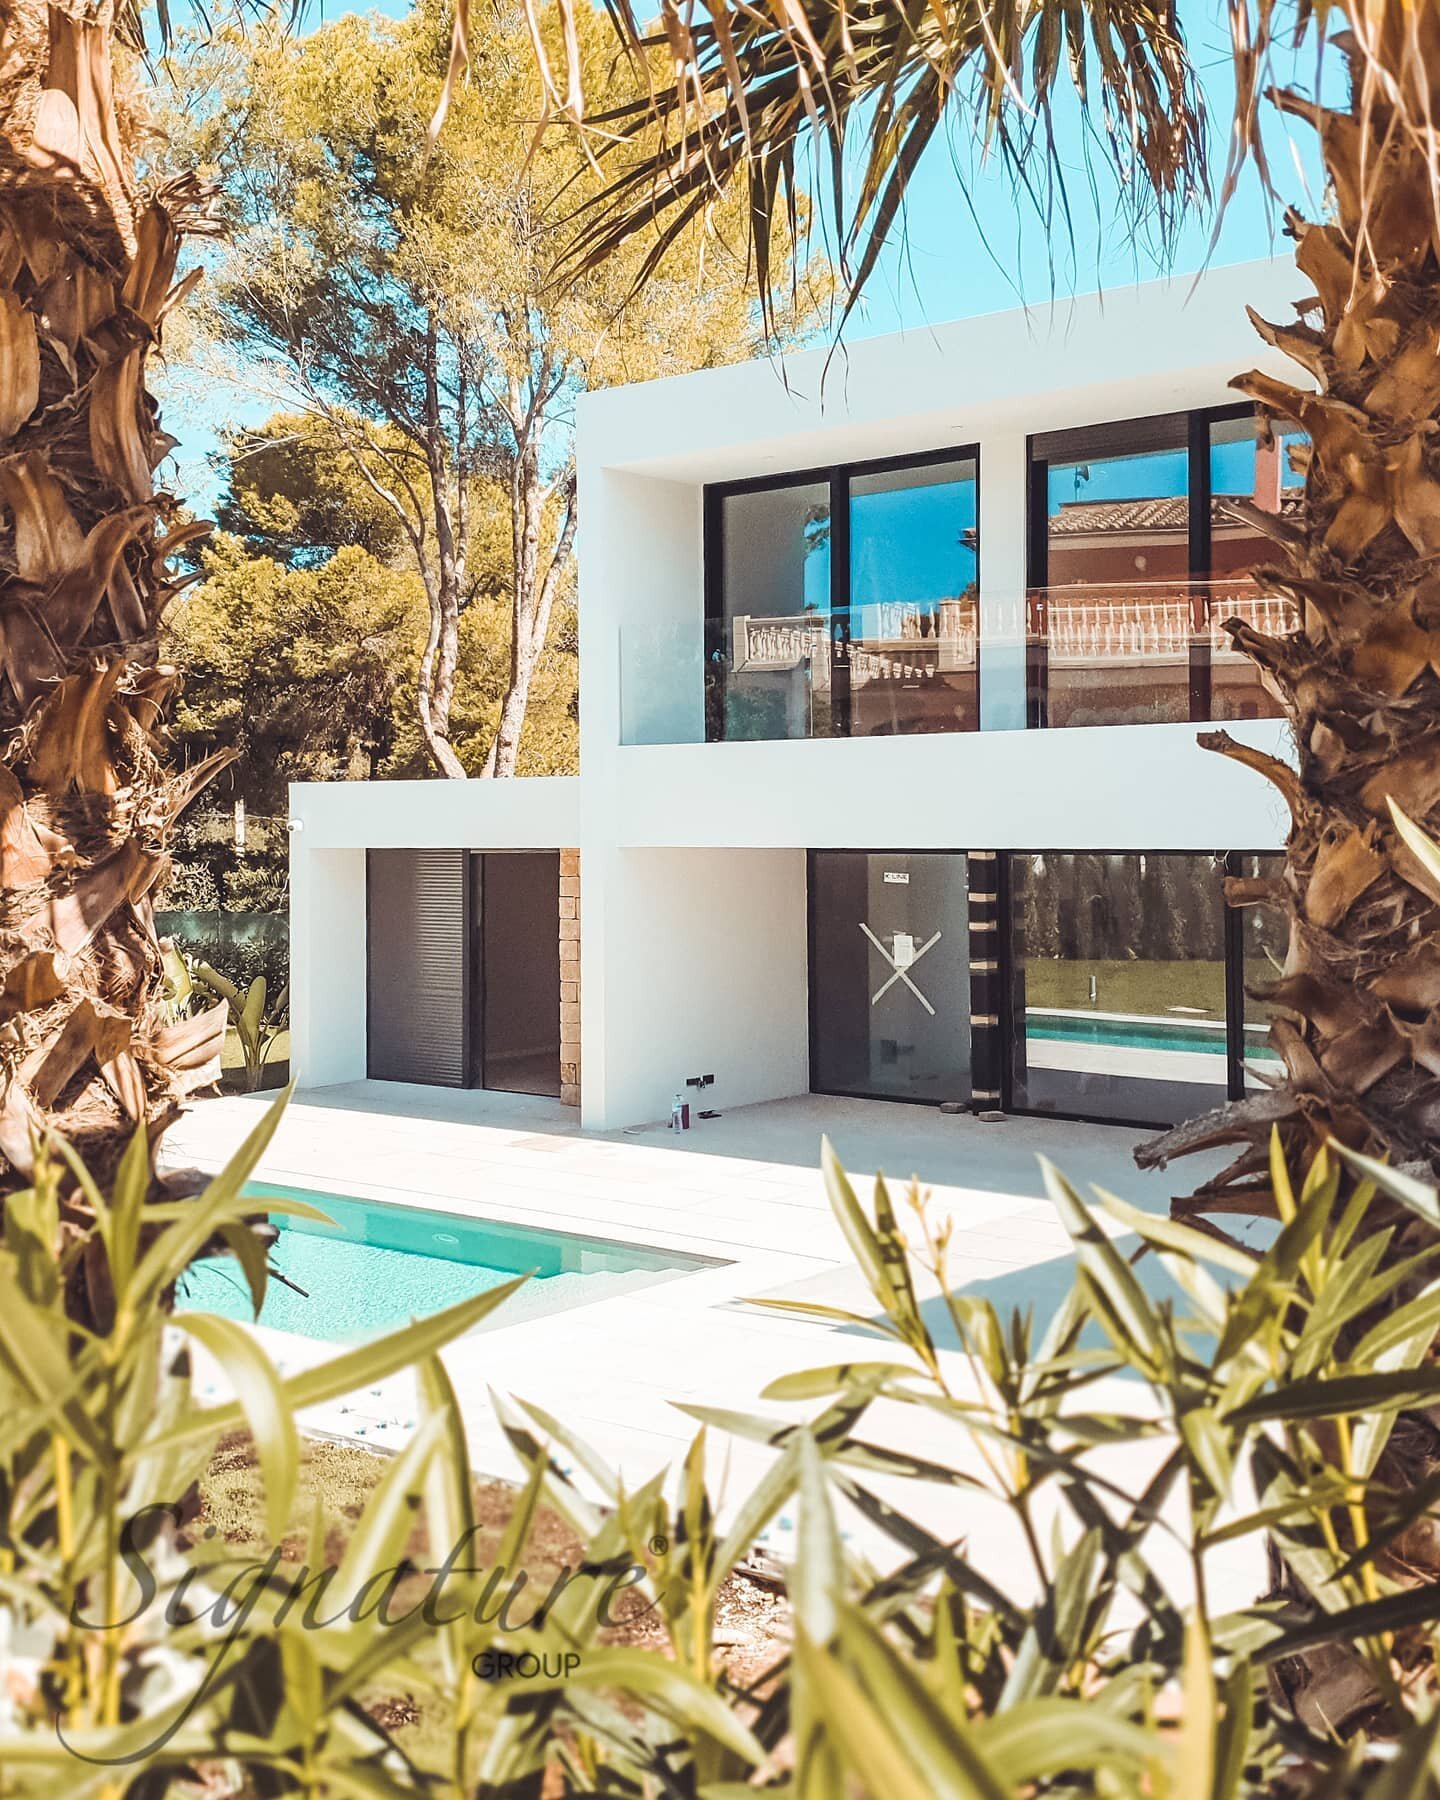 We're very excited to soon add another completed project to our portfolio. 
Villa Thesia, which is located in Santa Ponsa, close to the Club Nautico de Santa Ponsa, is a 4 bedroom / 3 bathroom cul-de-sac property with a generous garden, terrace and p